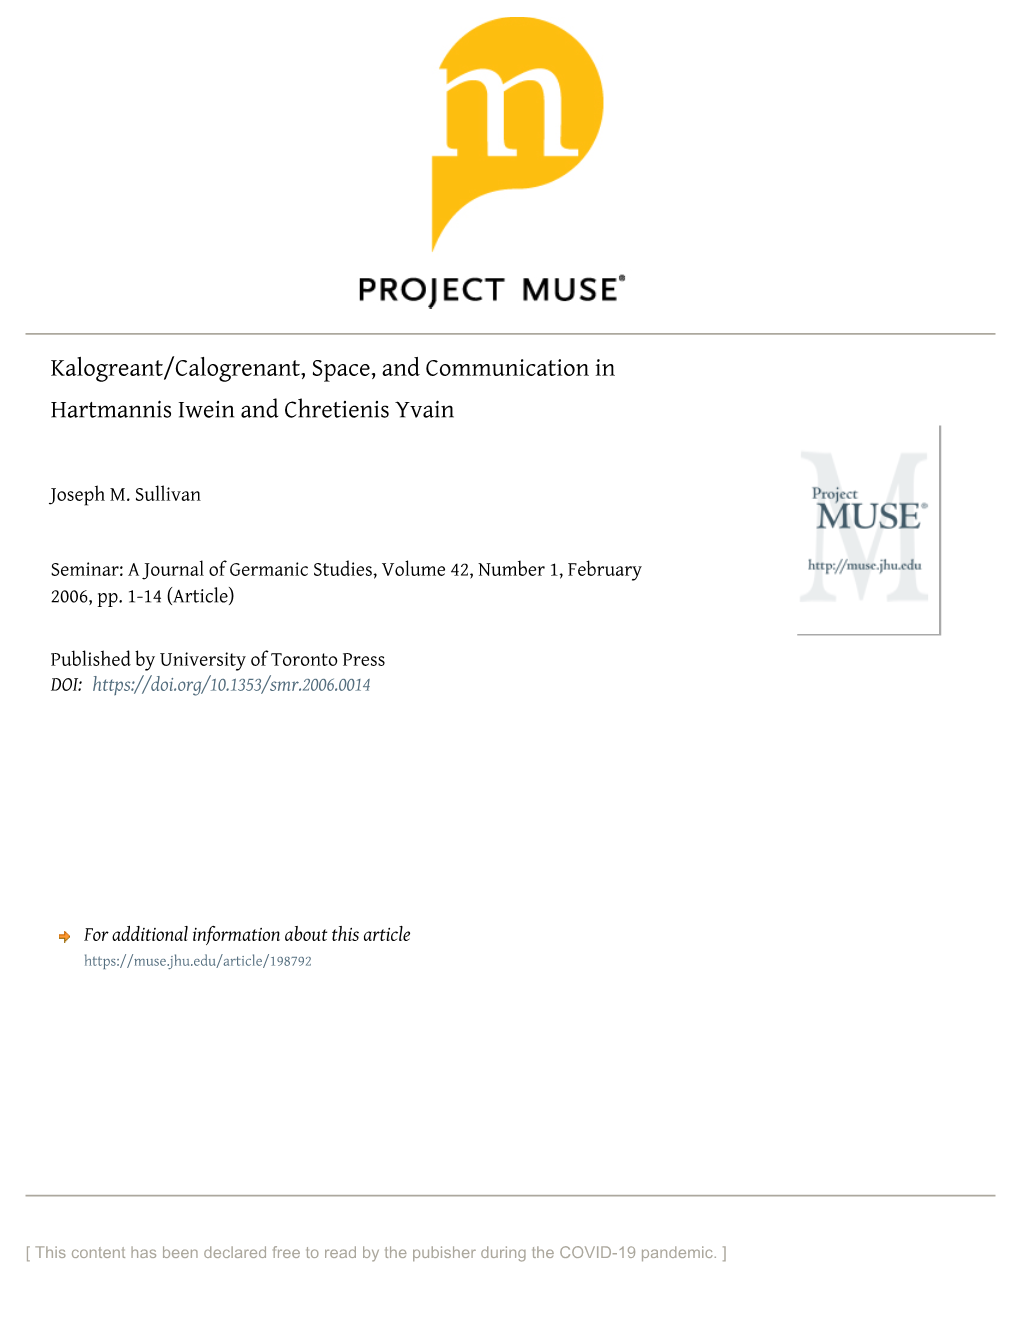 Kalogreant/Calogrenant, Space, and Communication in Hartmannis Iwein and Chretienis Yvain